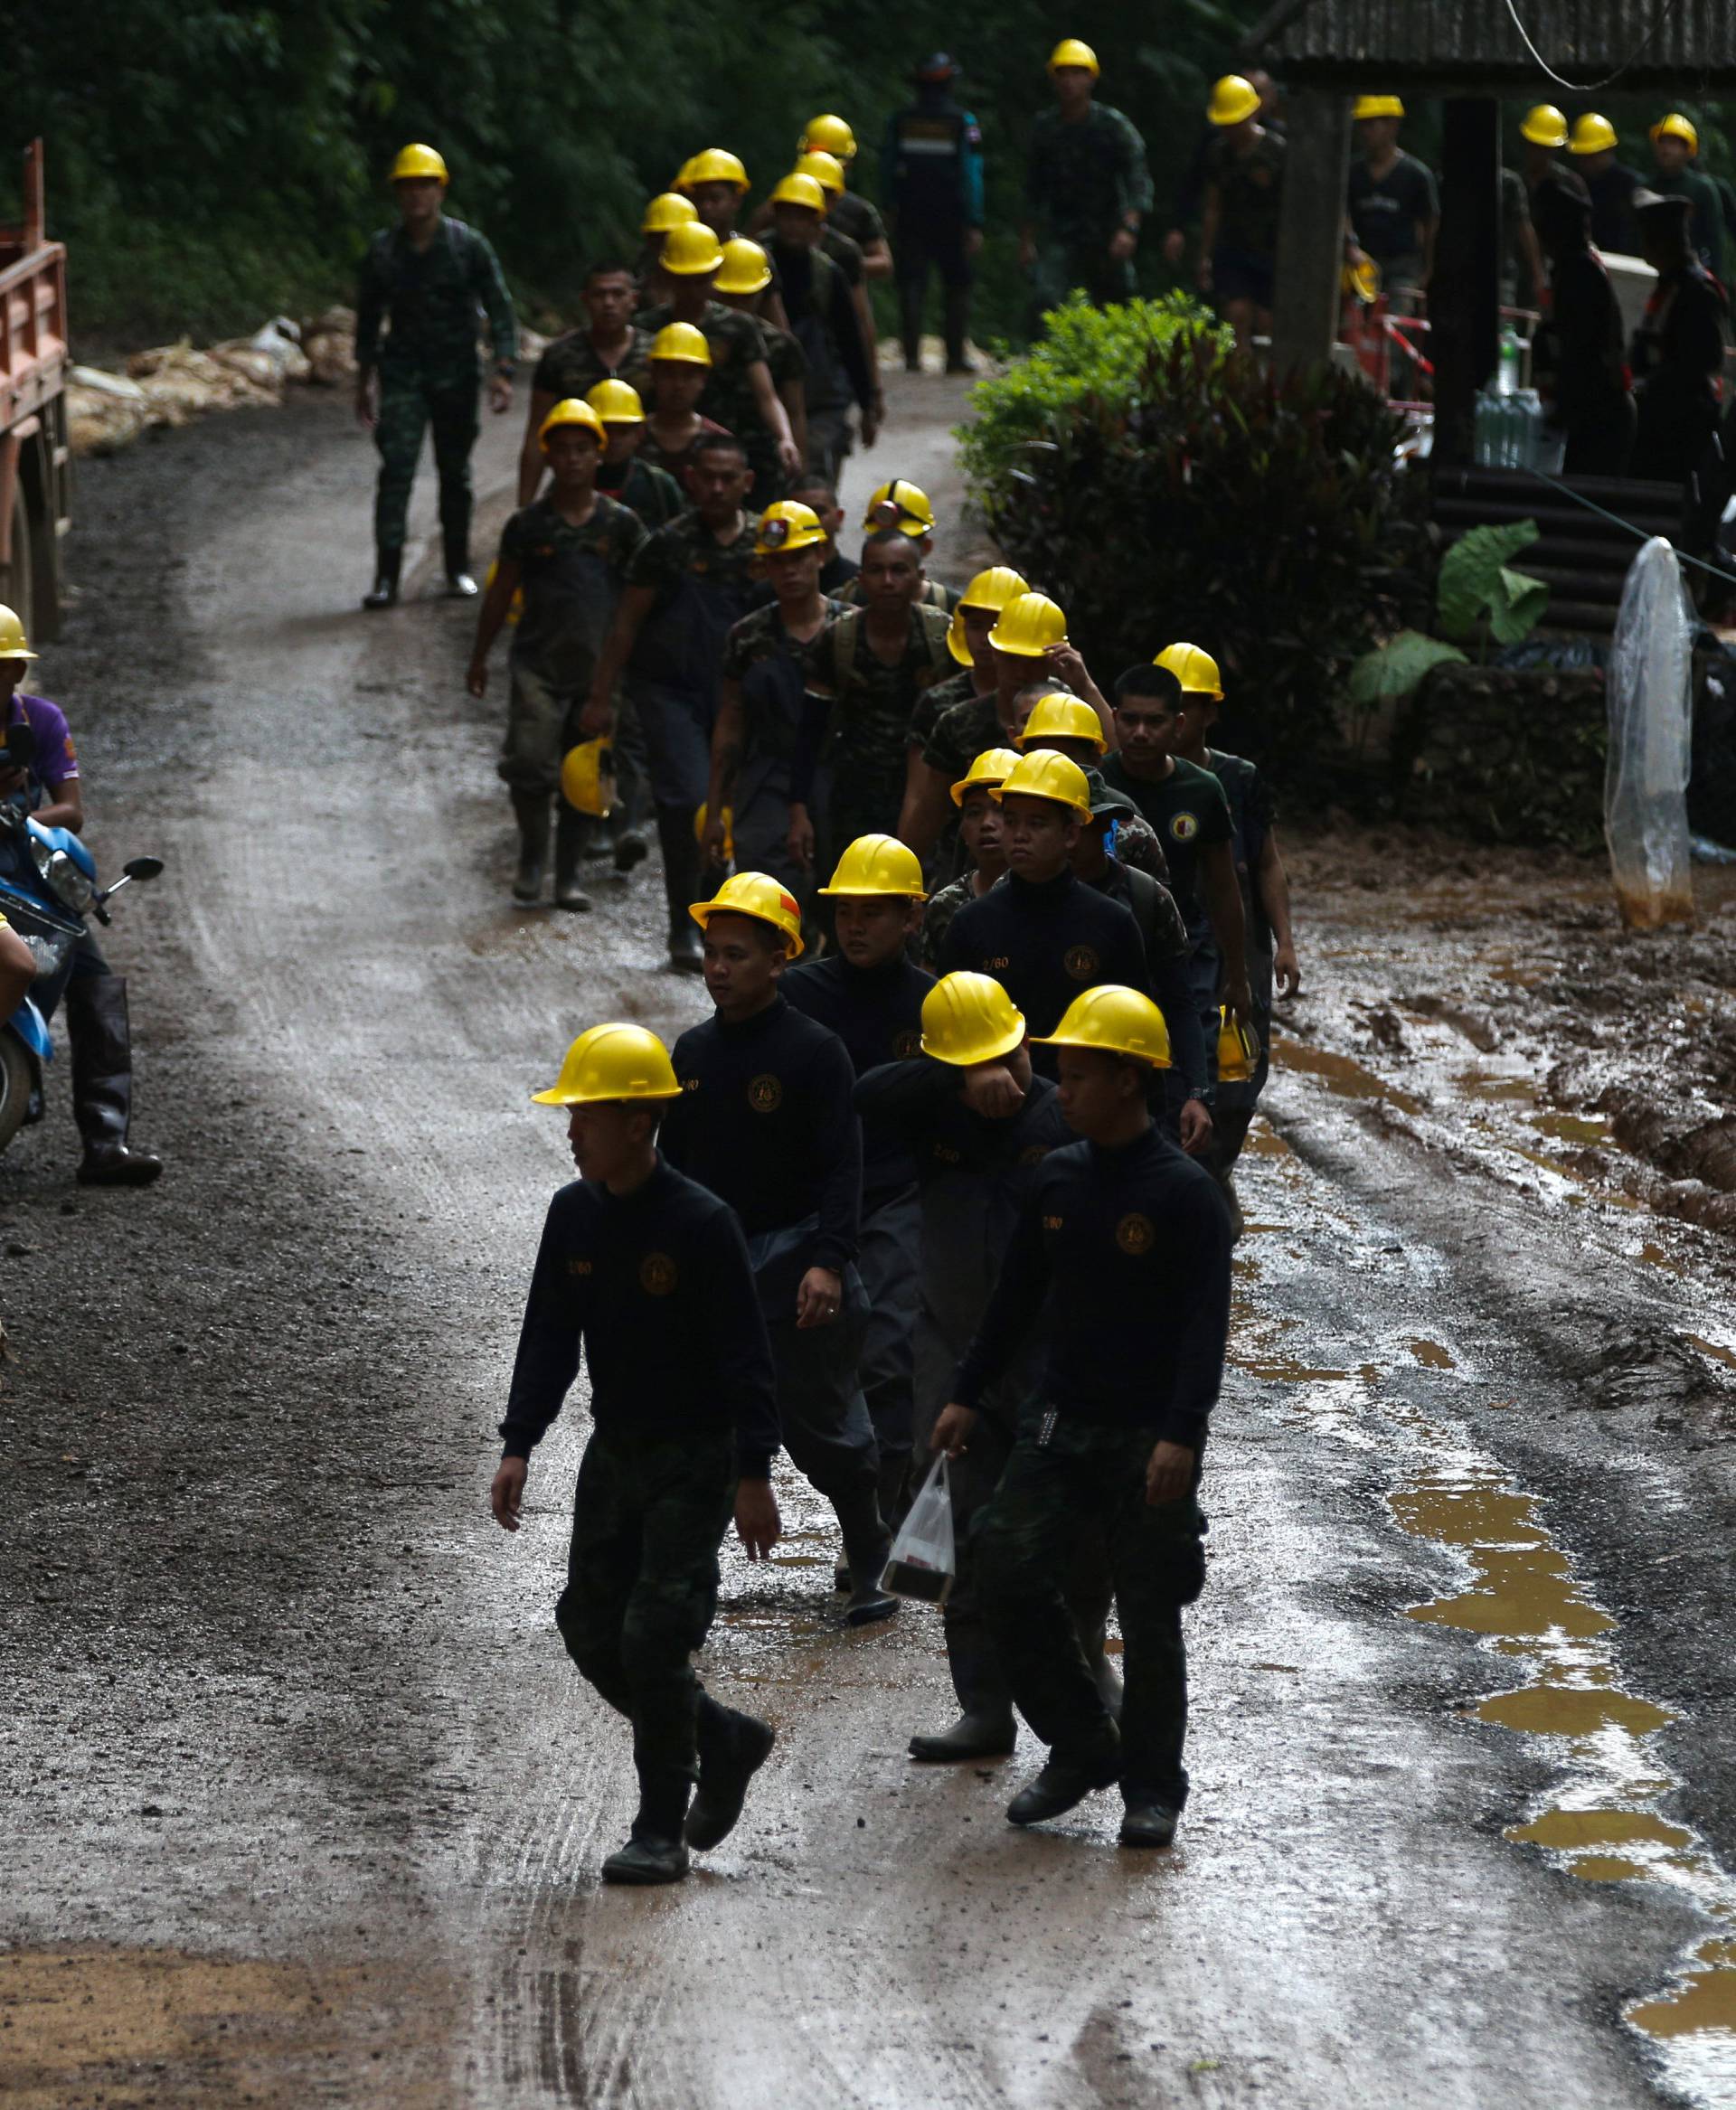 Military personnel walk in line as they prepare to enter the Tham Luang cave complex, where 12 boys and their soccer coach are trapped, in the northern province of Chiang Rai